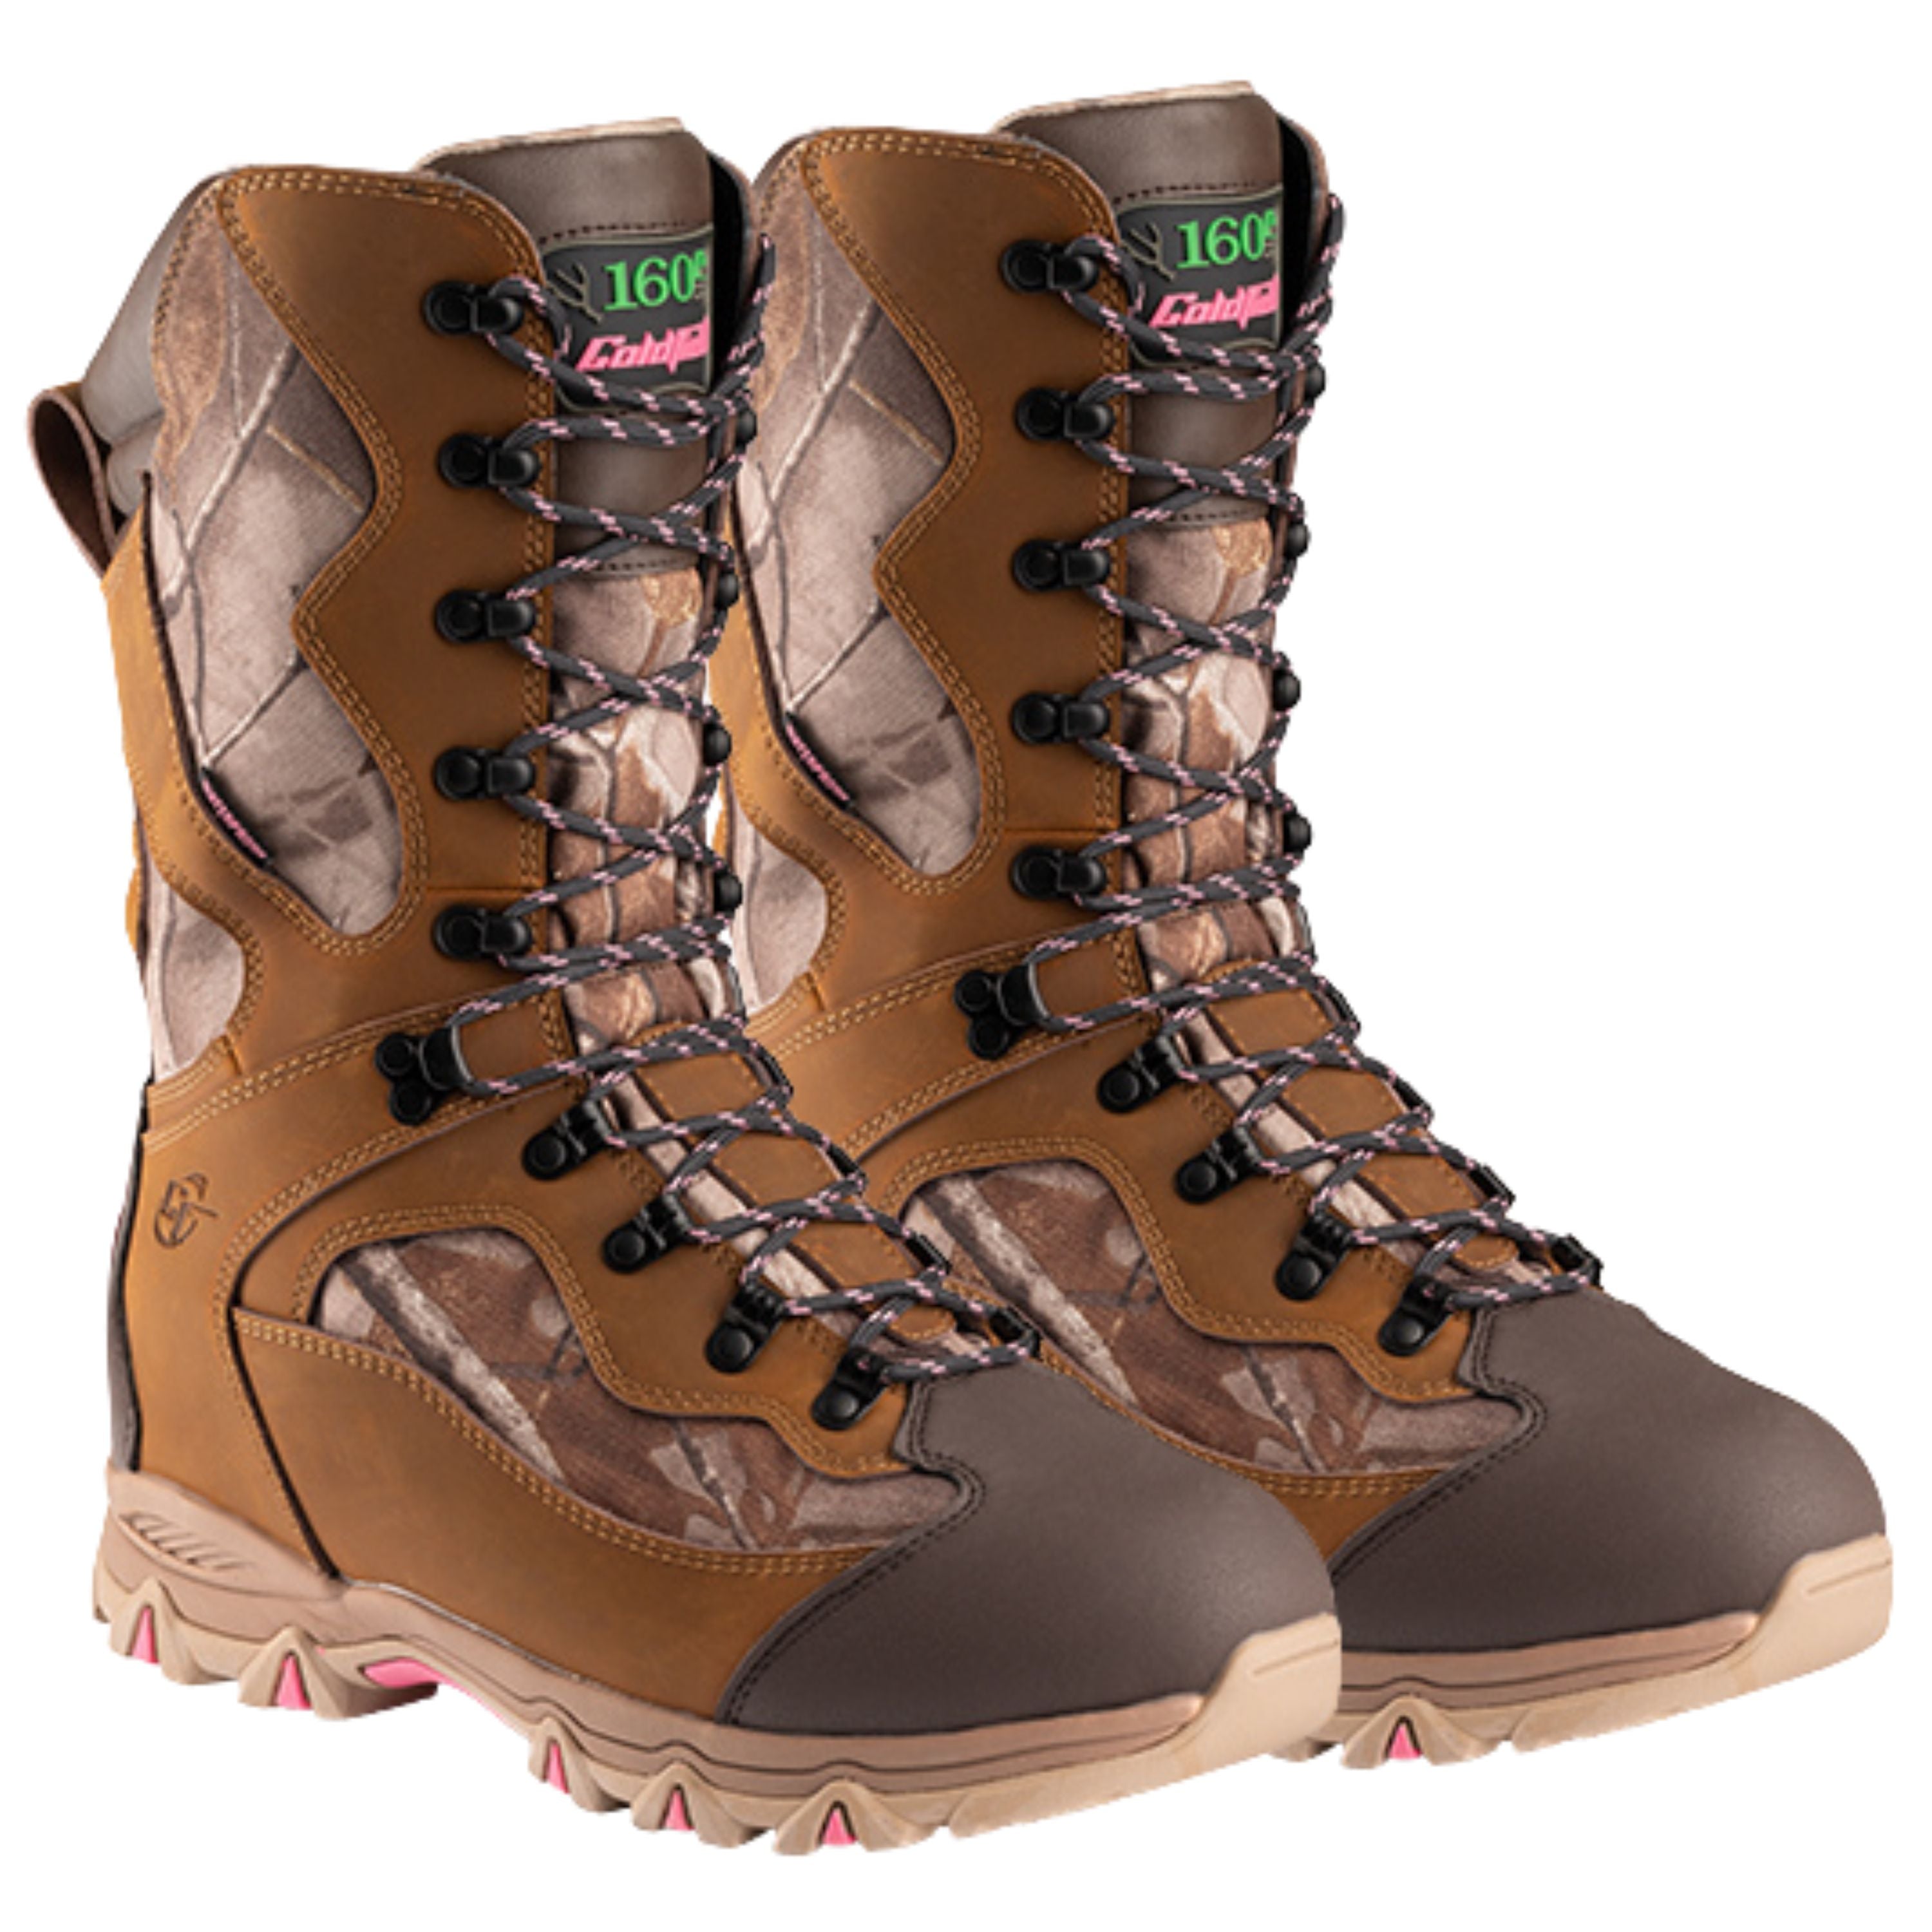 "Grizzly" Boots - Women's